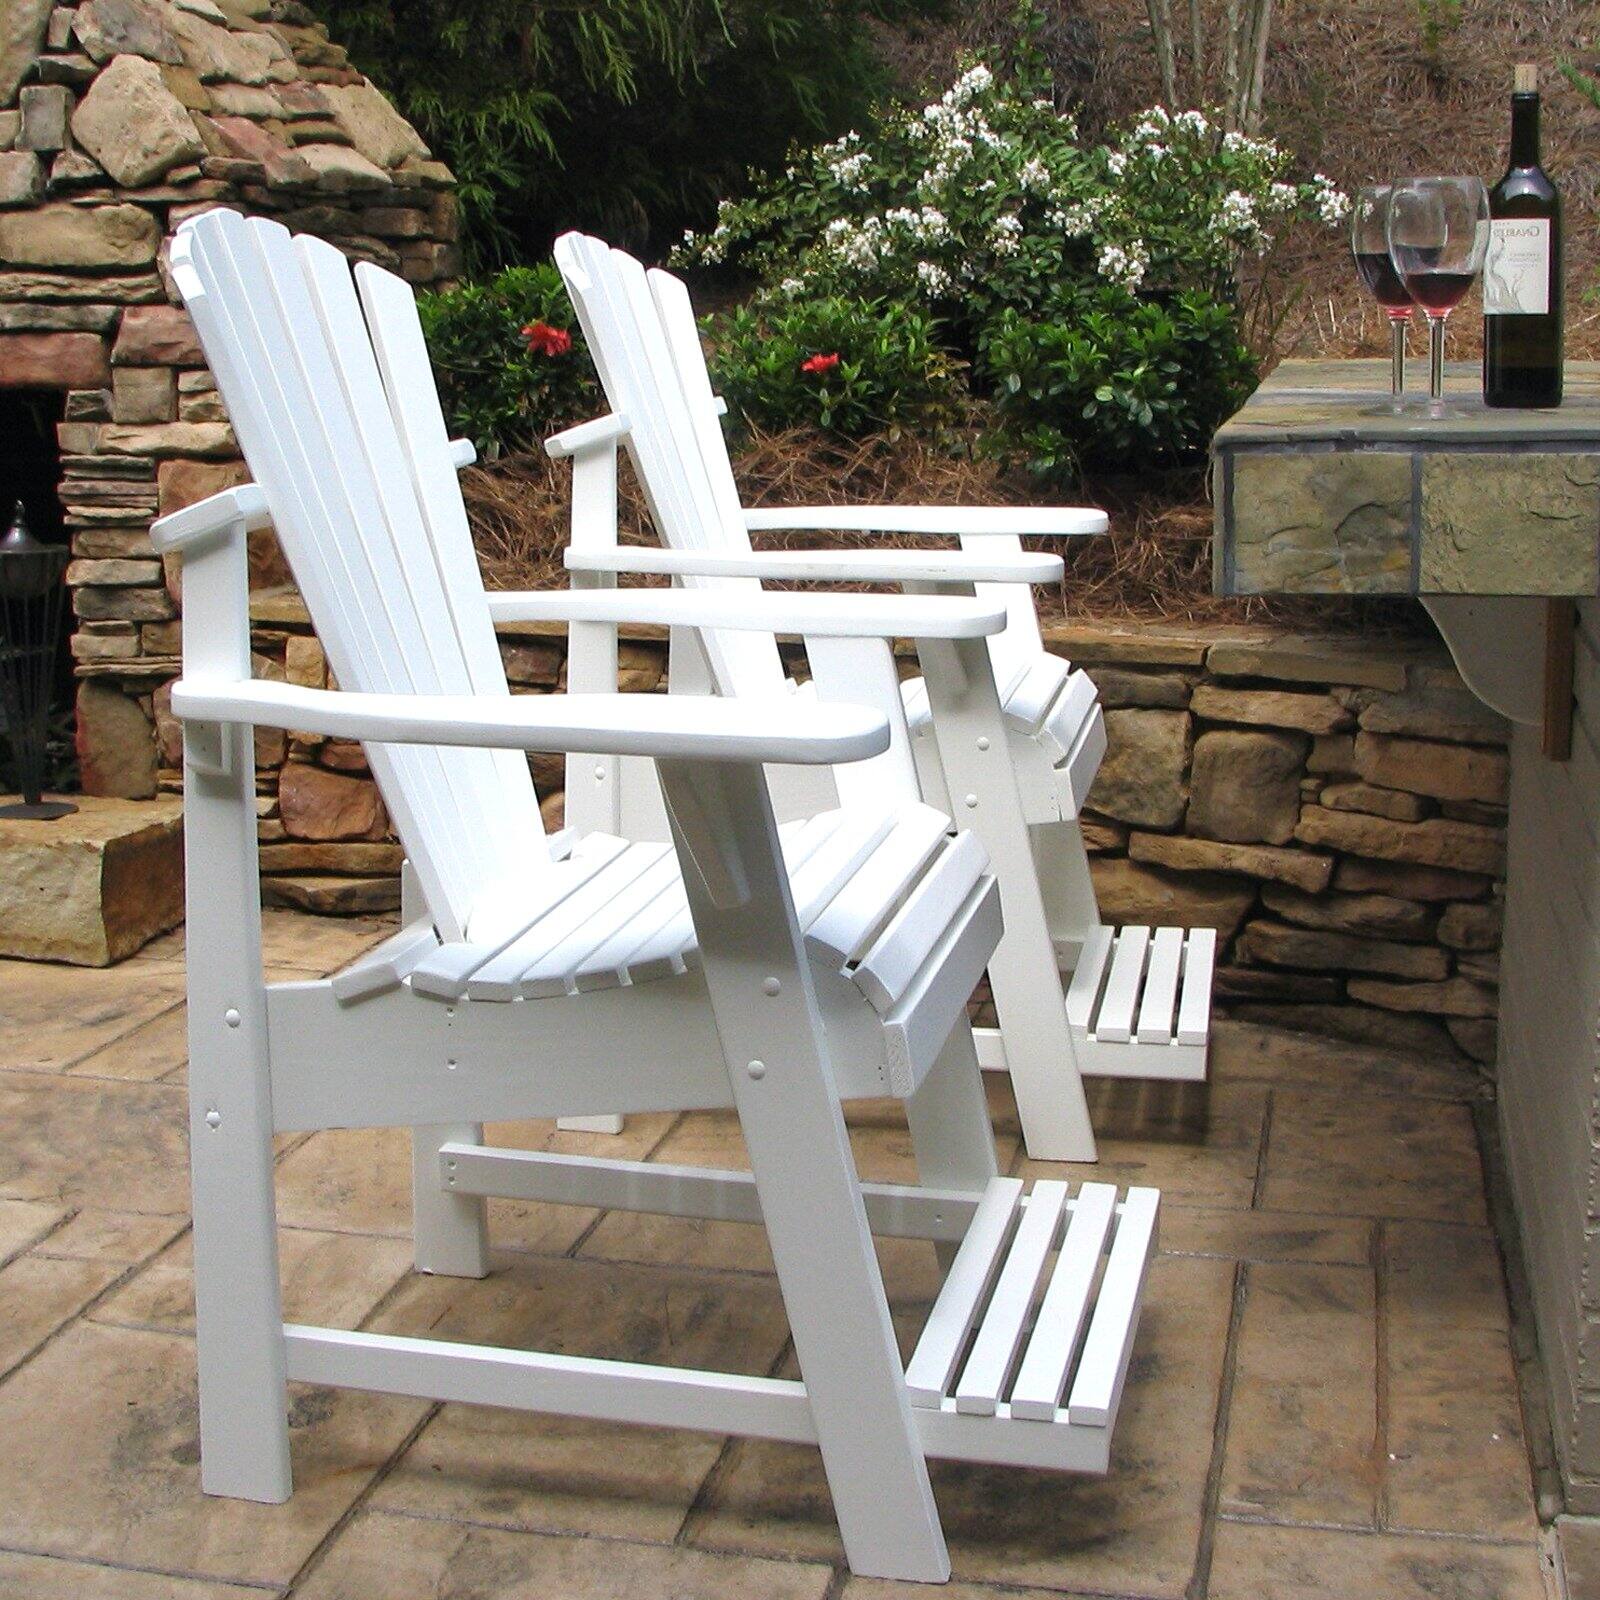 Weathercraft Designers Choice Painted Balcony Adirondack Chair with Footrest - image 1 of 3